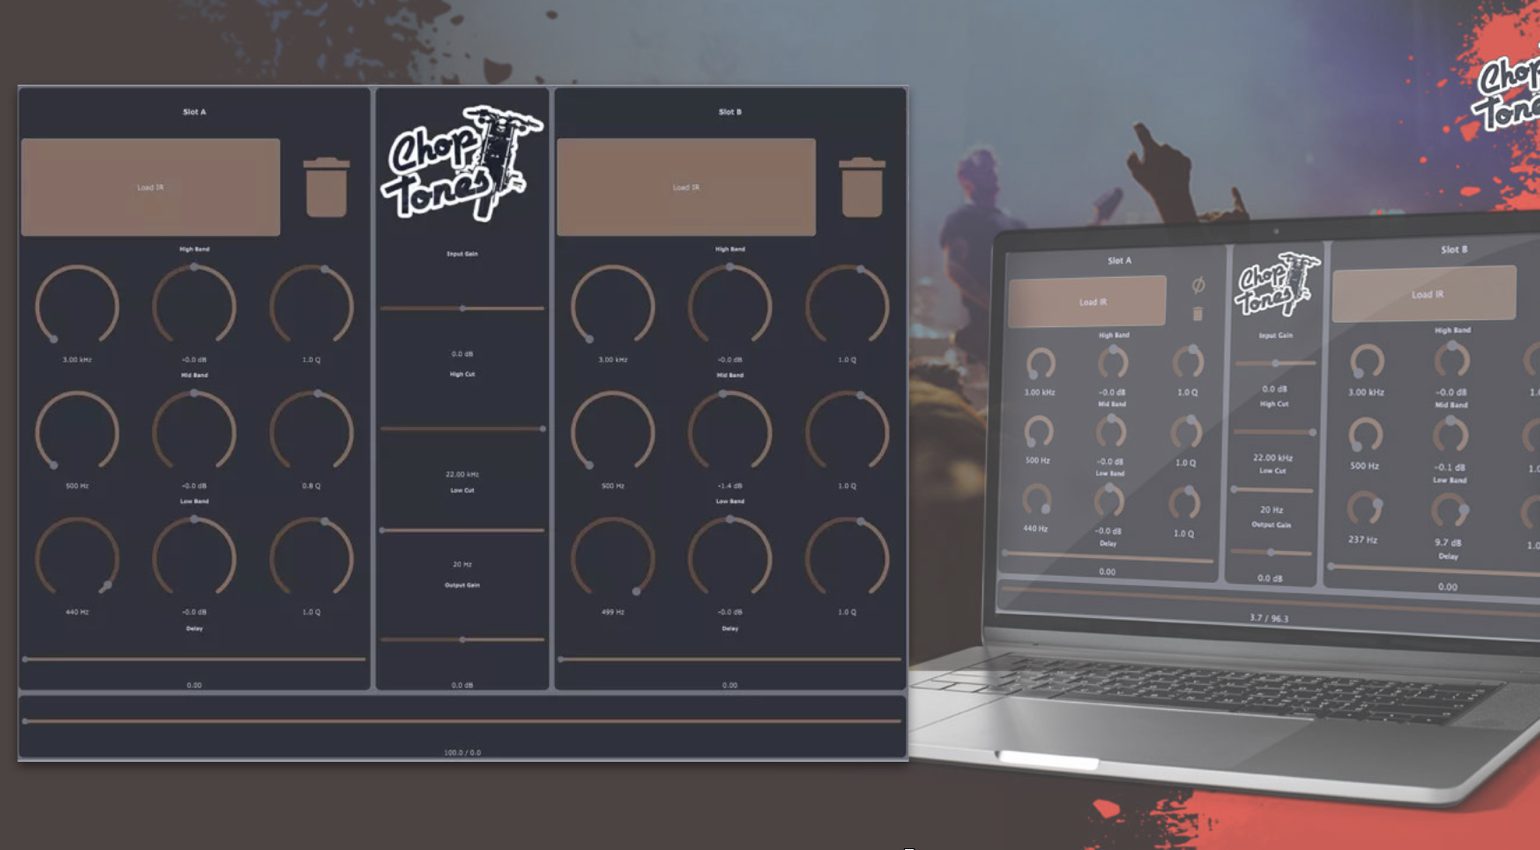 Grab ChopTones IR Loader as a free download for a limited time